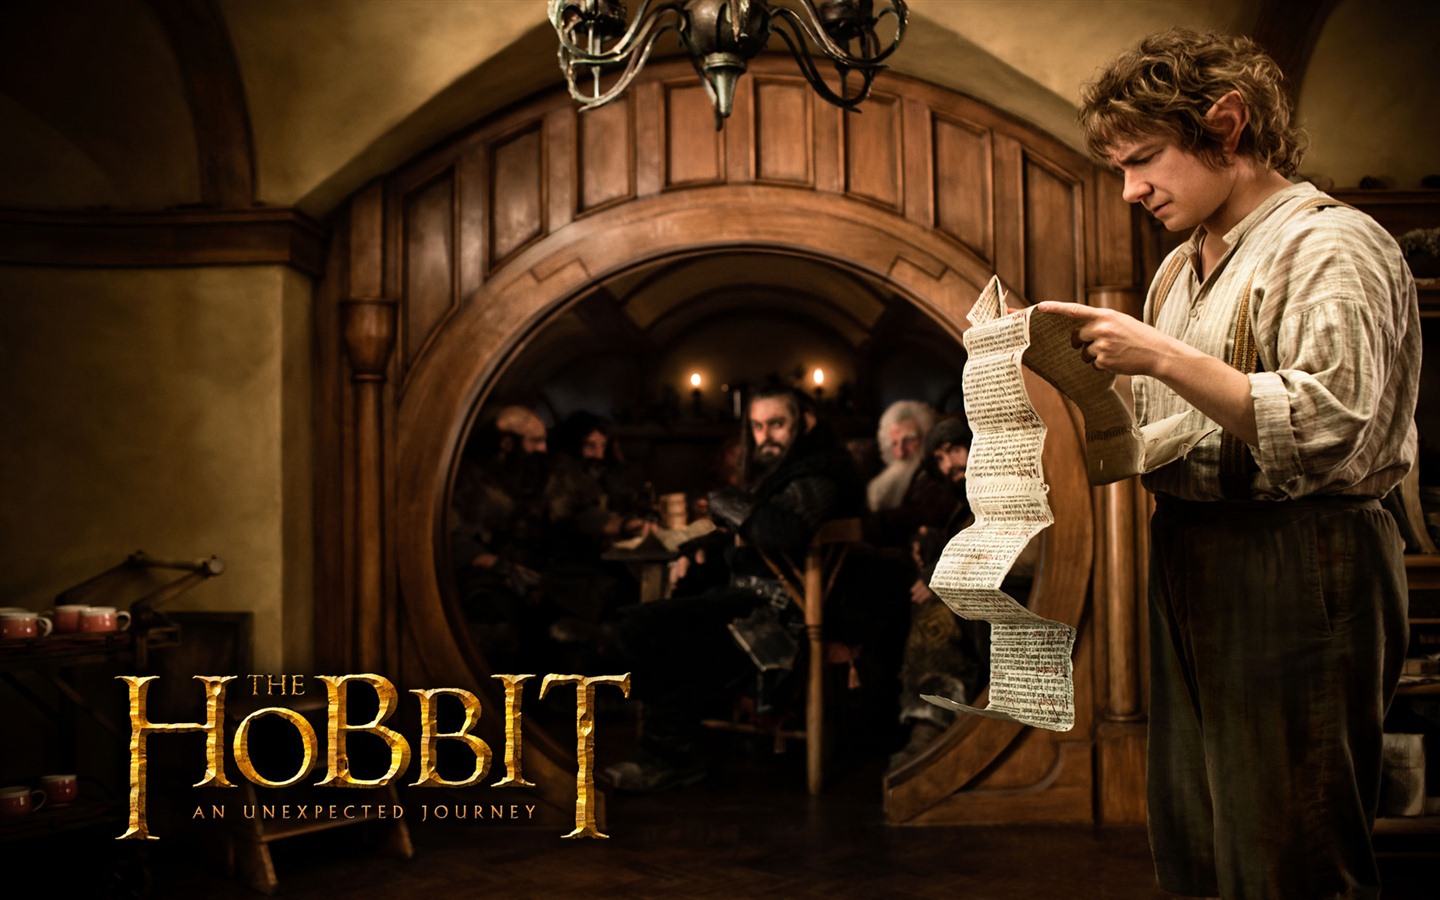 The Hobbit: An Unexpected Journey HD wallpapers #12 - 1440x900